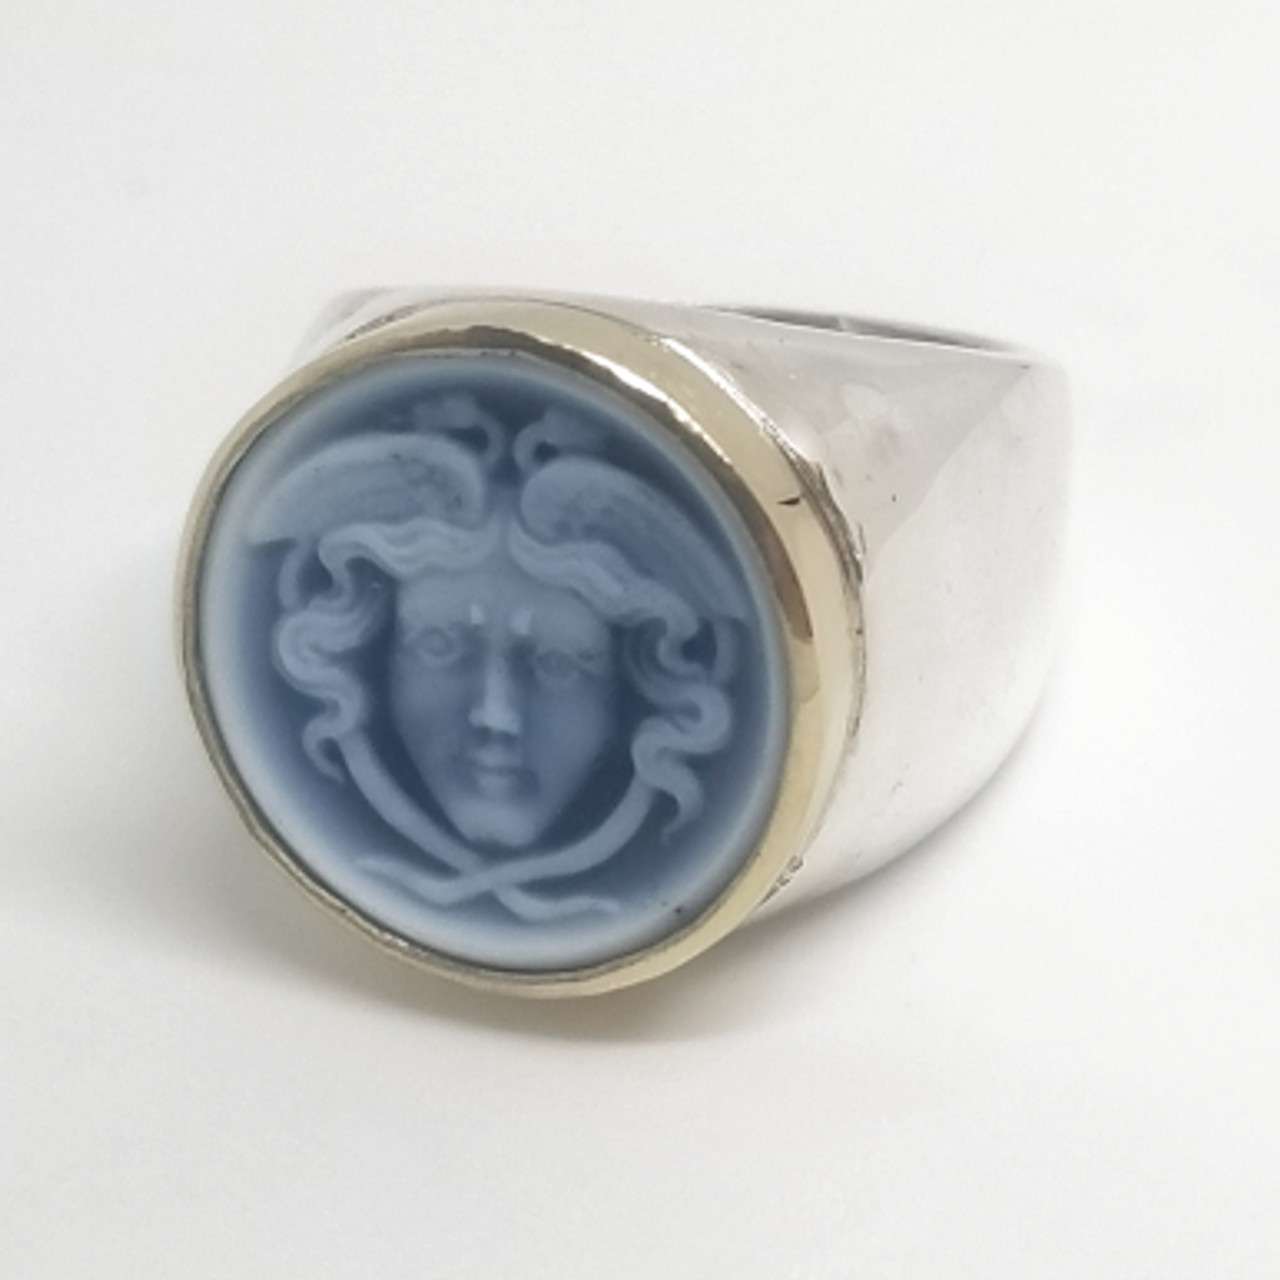 Vintage Art Deco Sterling Silver Cameo Ring With Marcasite. c 1920 | eBay